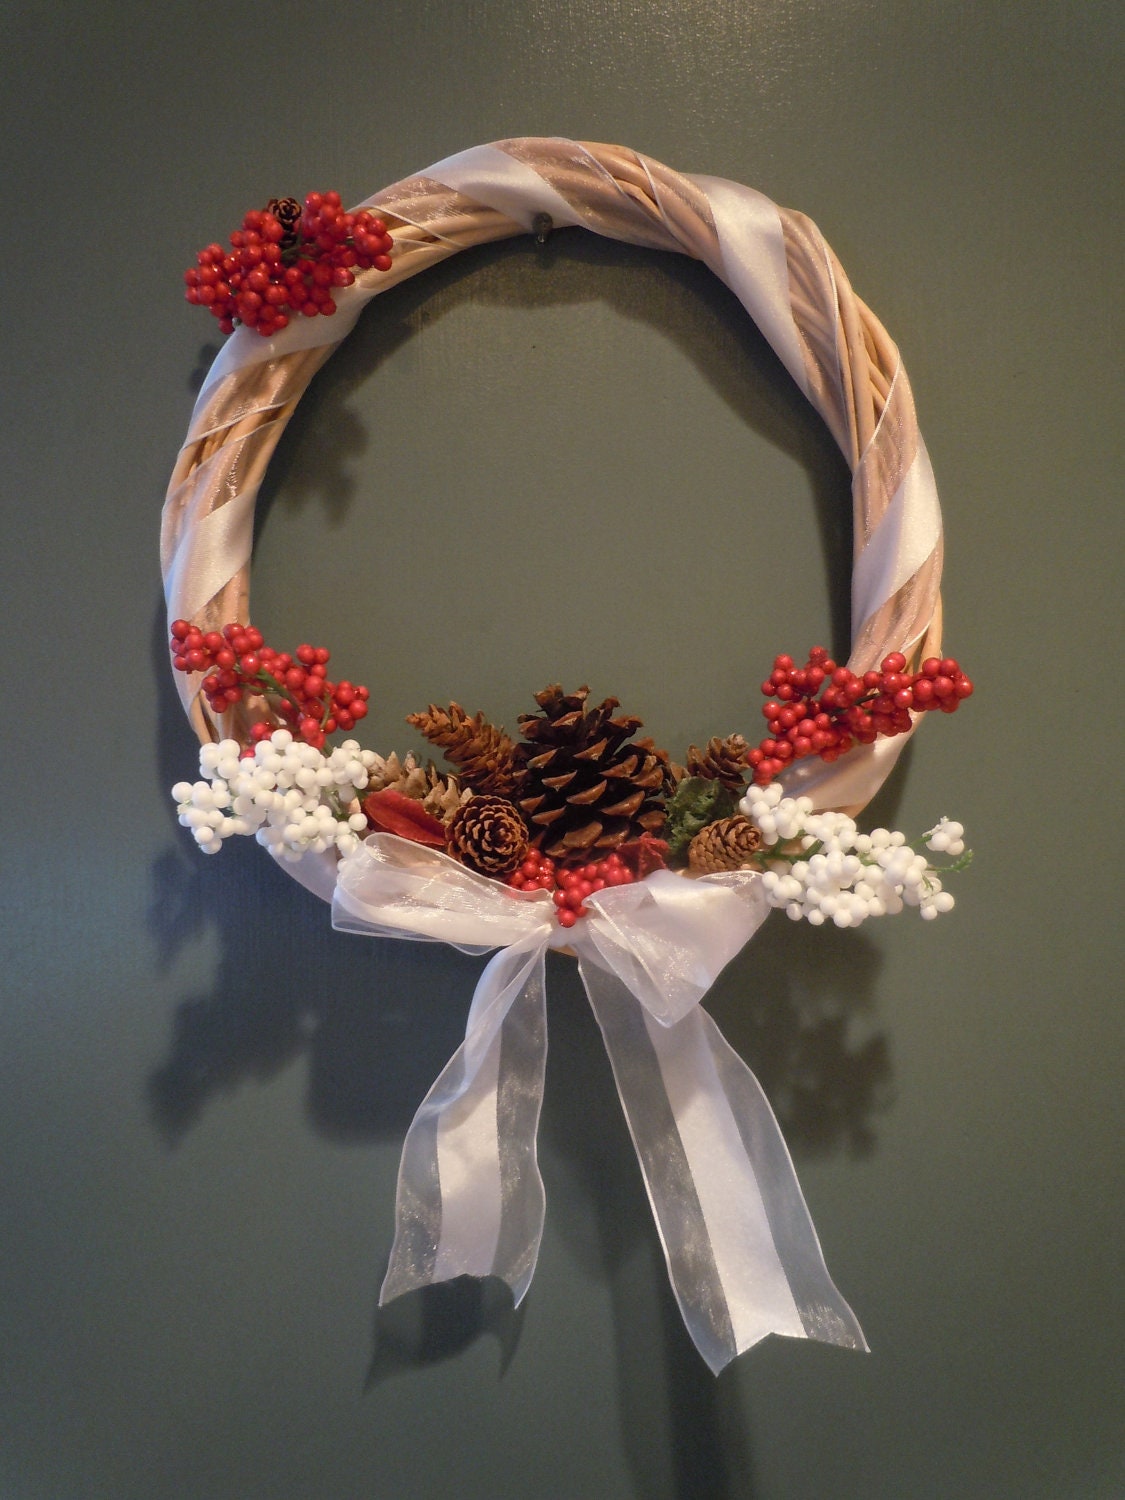 Scented christmas wreaths